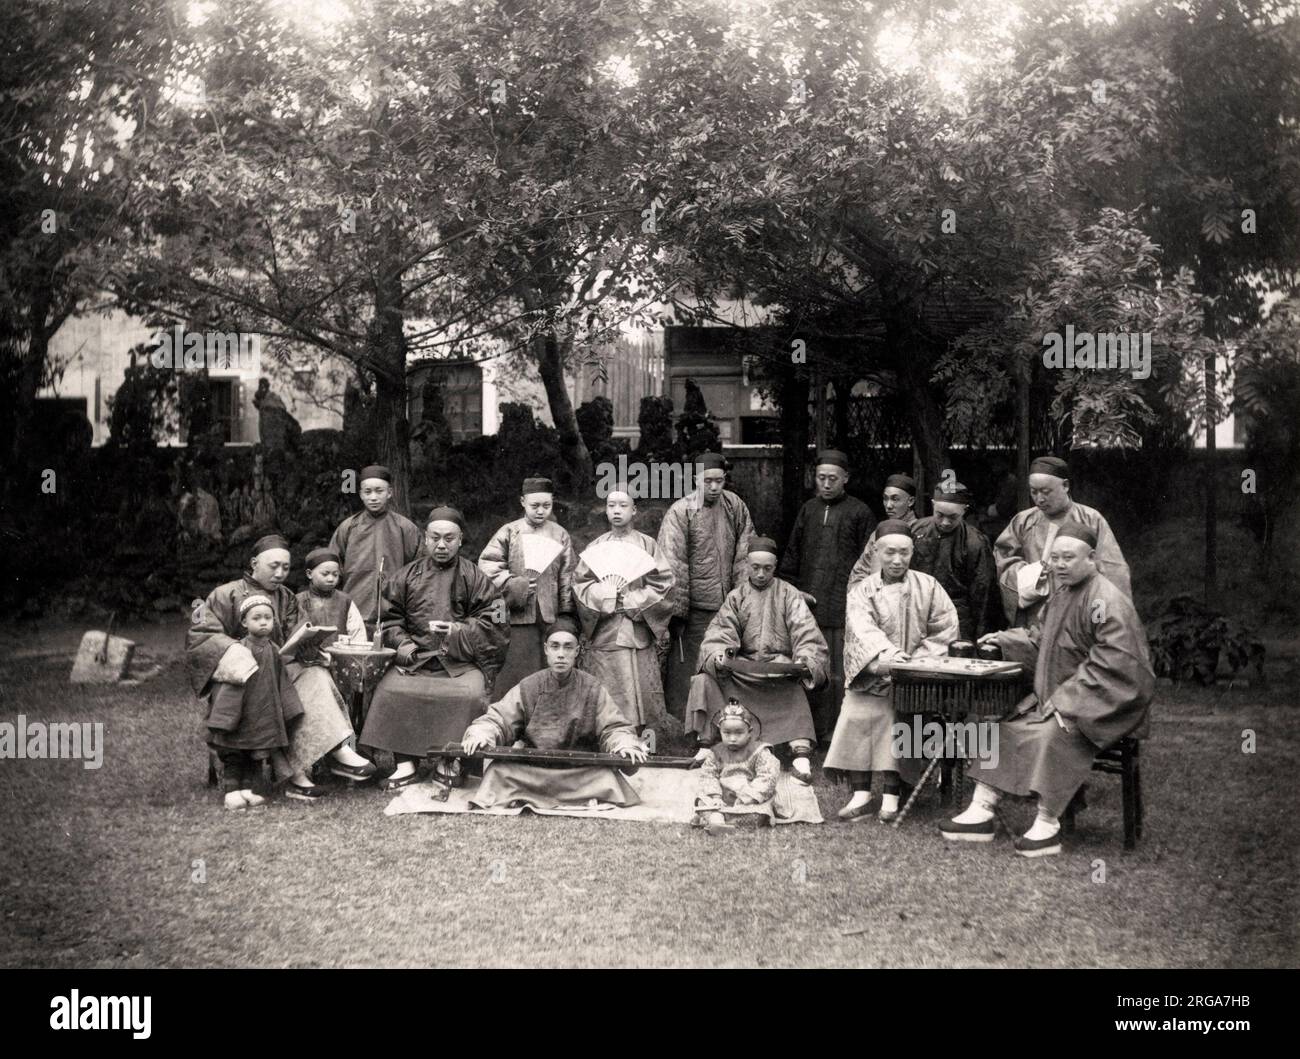 Vintage 19th century photograph: Group of Chinese men outdoors playing board games Stock Photo